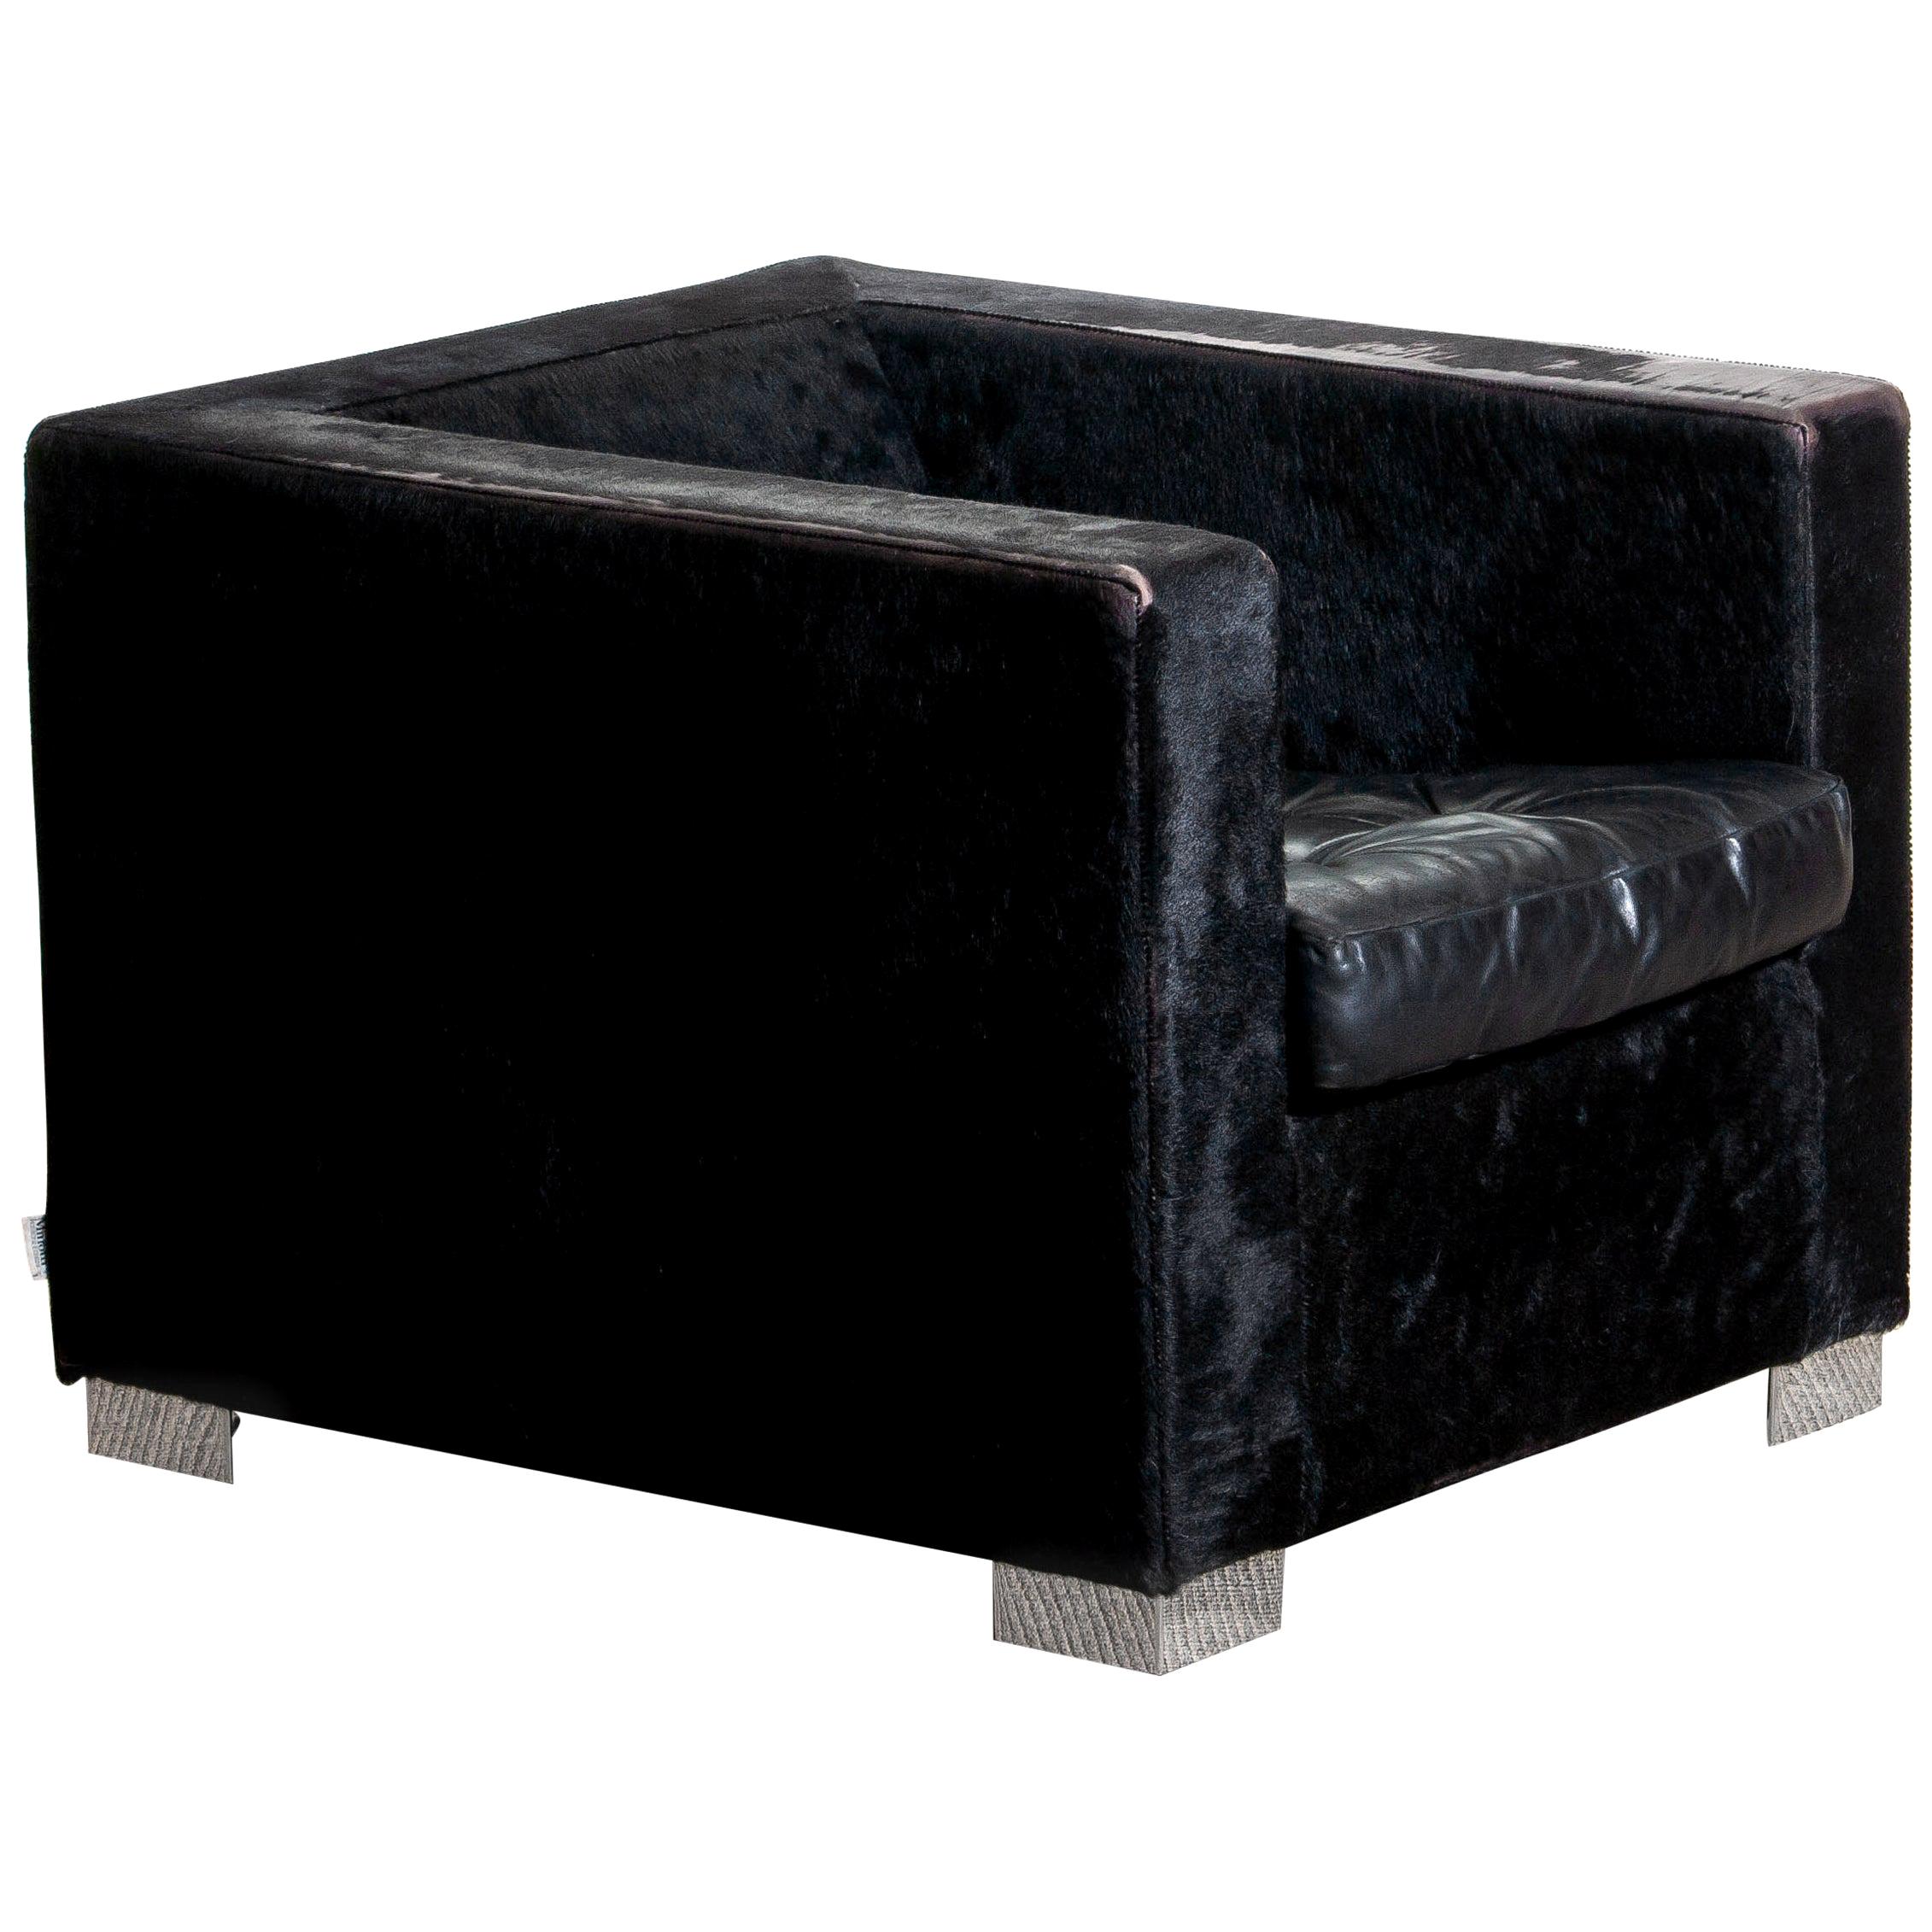 Mid-Century Modern 1990s, Black Lounge Chair in Pony and Leather by Rodolfo Dordoni for Minotti